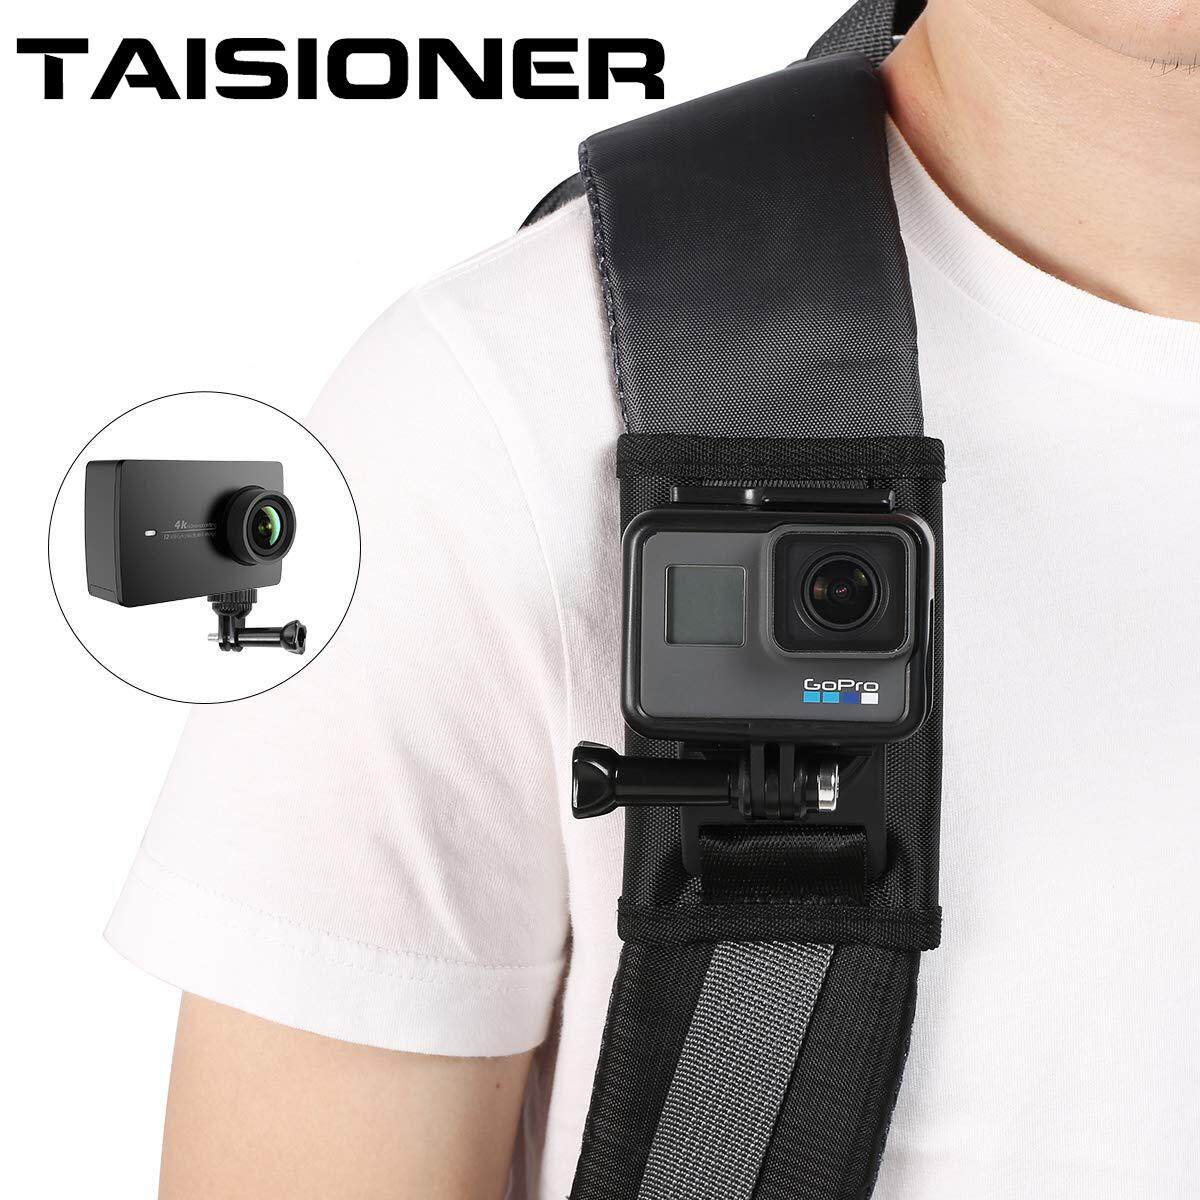 Taisioner Smartphone Selfie Neck Holder Mount for GoPro Action Camera and Cell Phone Video Shooting Accessories 